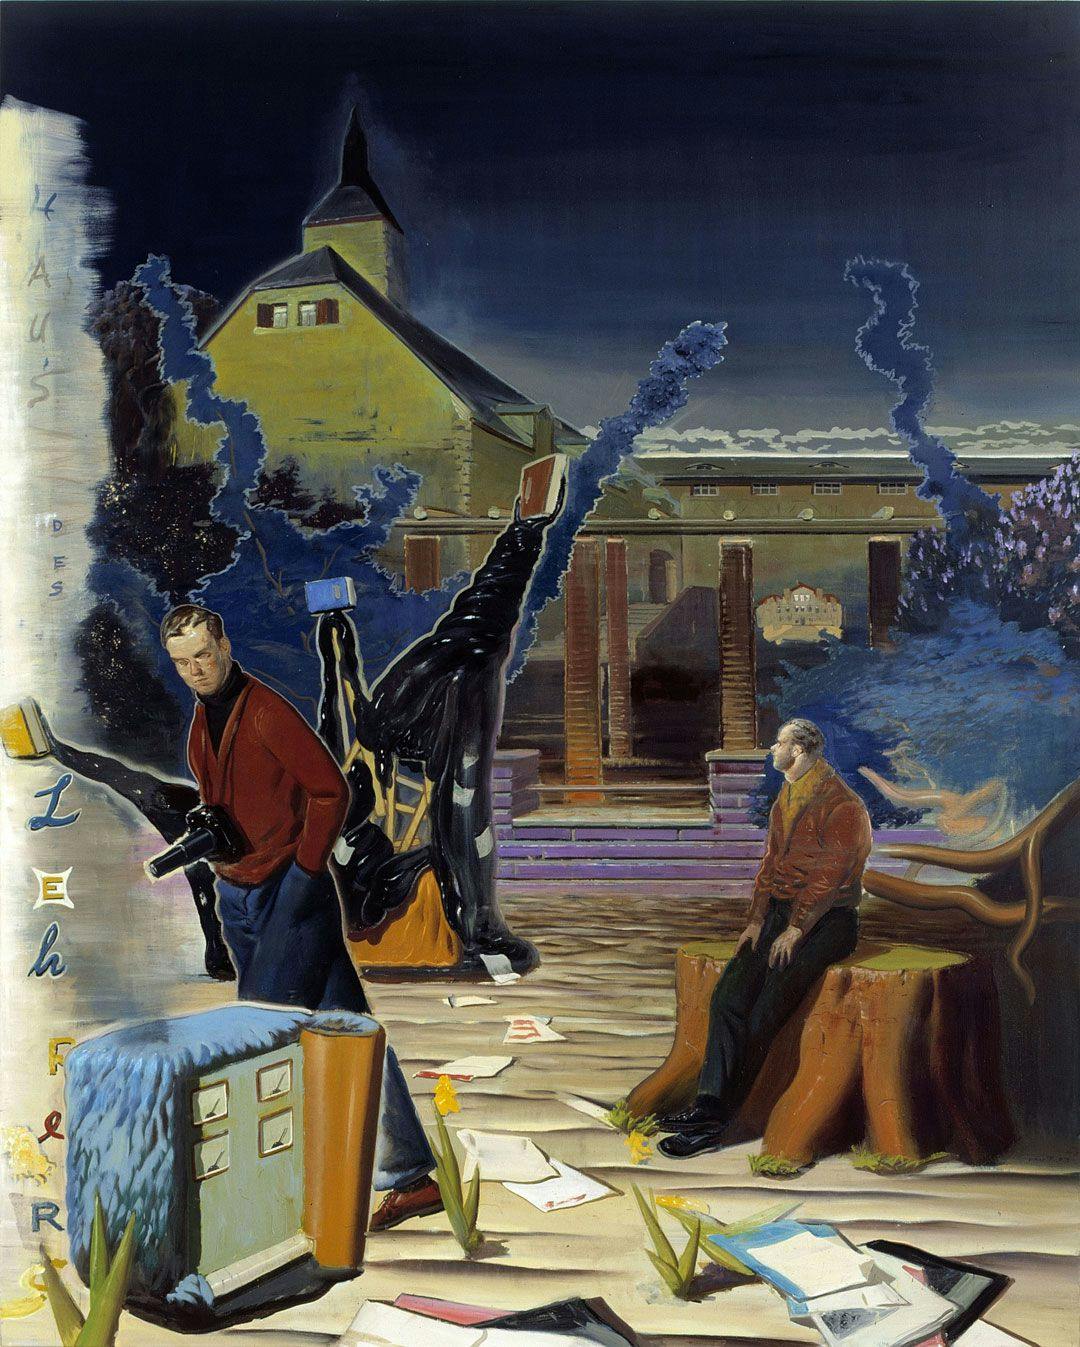 A painting by Neo Rauch, titled Haus des Lehrers, dated 2003.